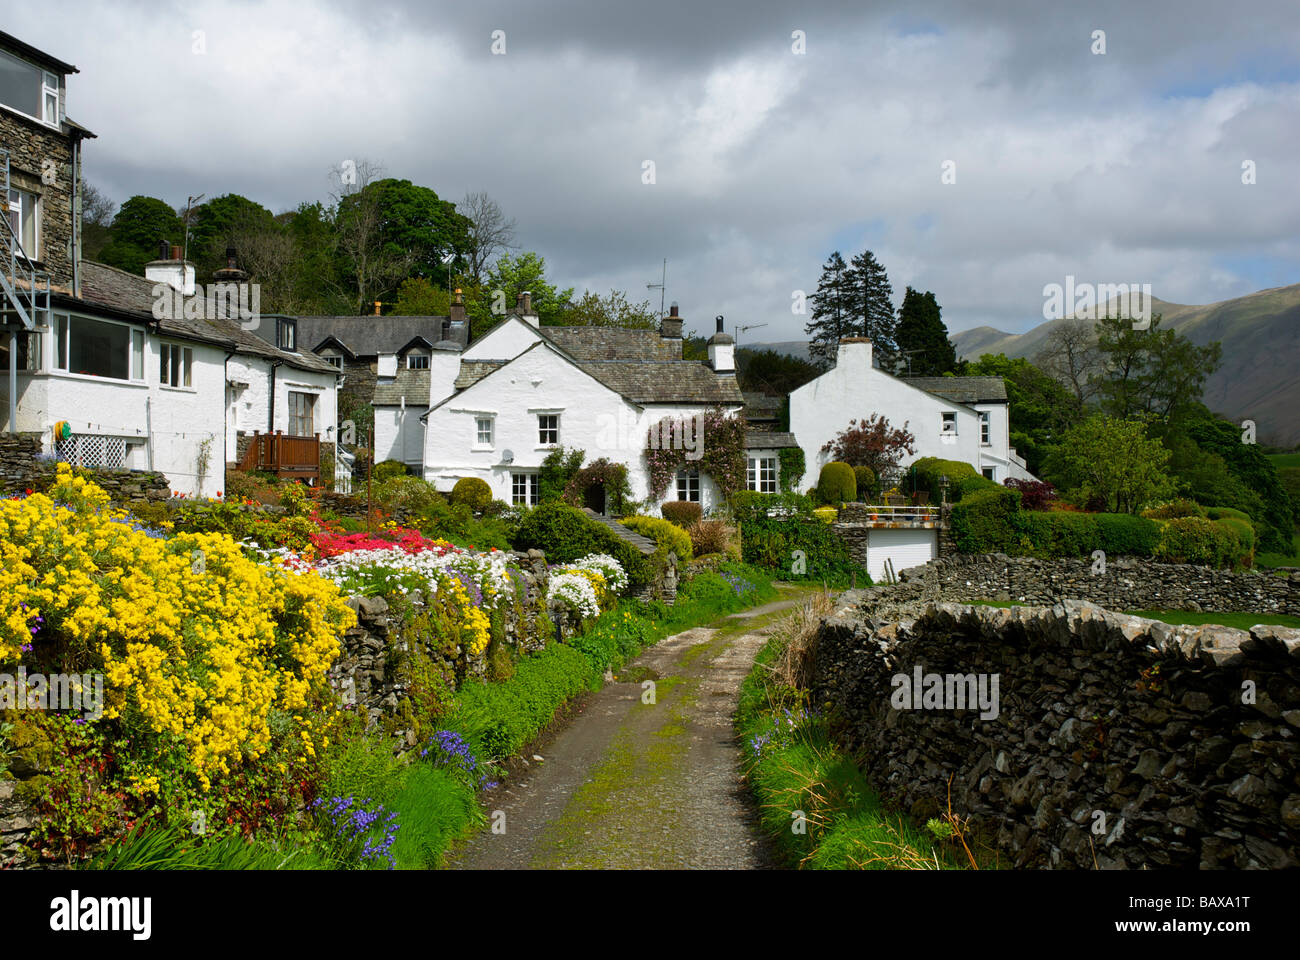 Narrow lane and houses in the village of Troutbeck, near Ambleside, Lake District National Park, Cumbria, England UK Stock Photo